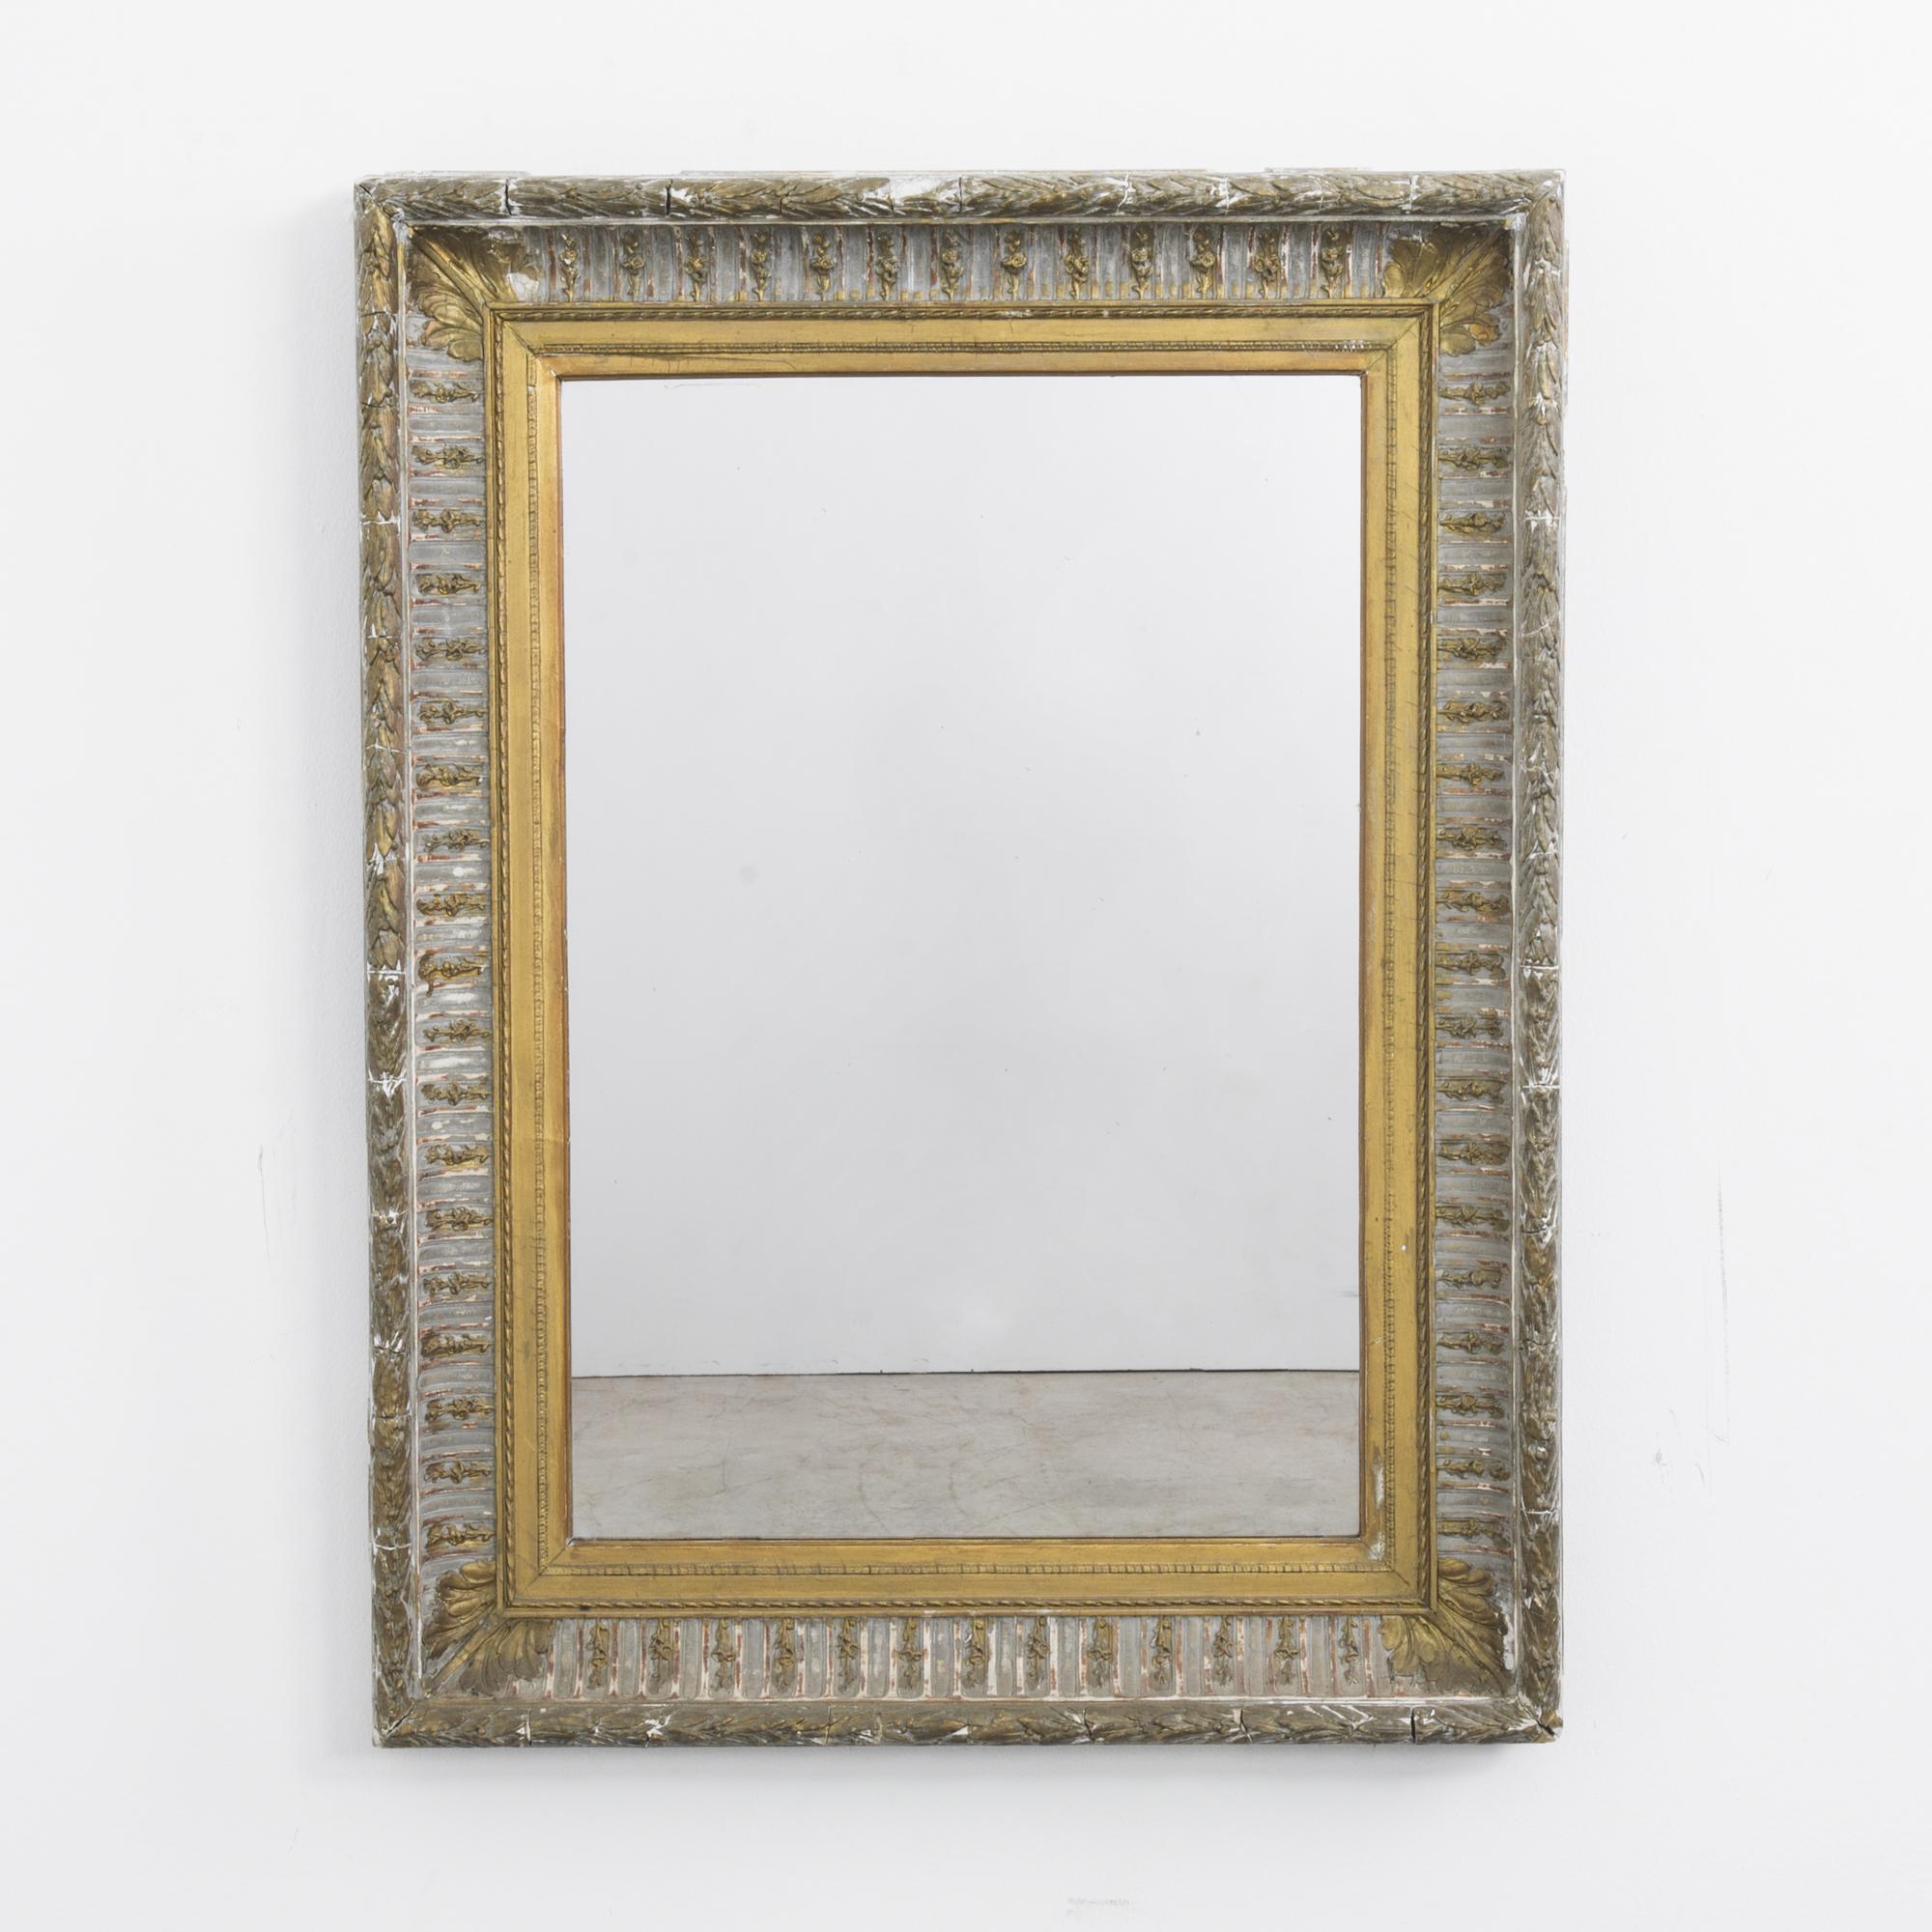 An antique gilded mirror from France, circa 1870. Elaborate filigree motifs — leaves, tulips, fleur de lis — scroll around the border of the frame. Age and patination create a range of tones, from pale gold to warm copper. A soft distortion in the